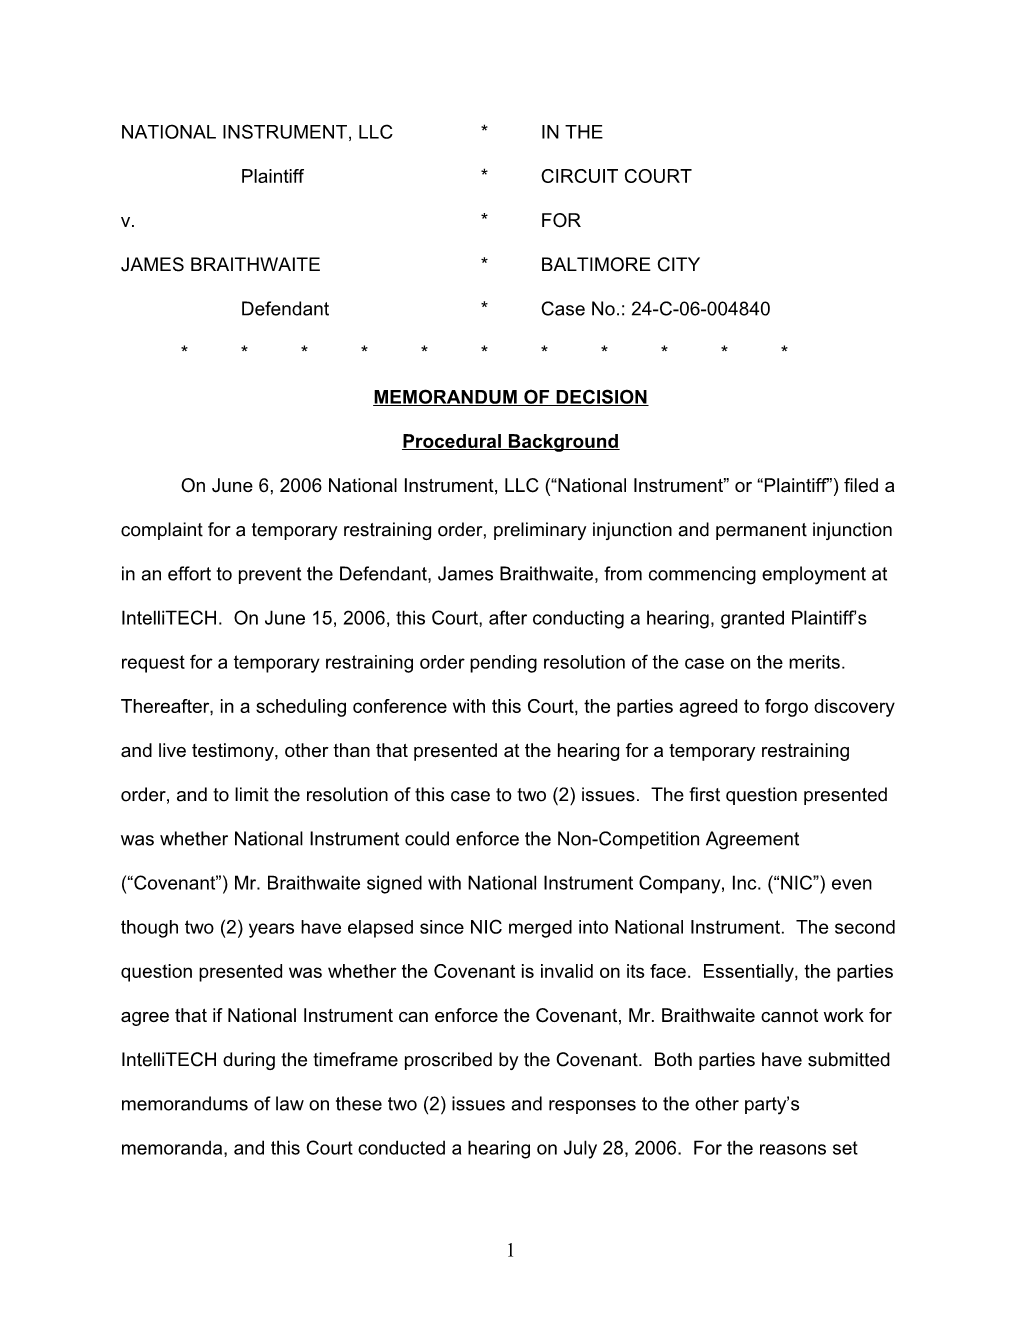 On June 6, 1006 National Instrument, LLC ( Plaintiff ) Filed a Complaint for a Temporary